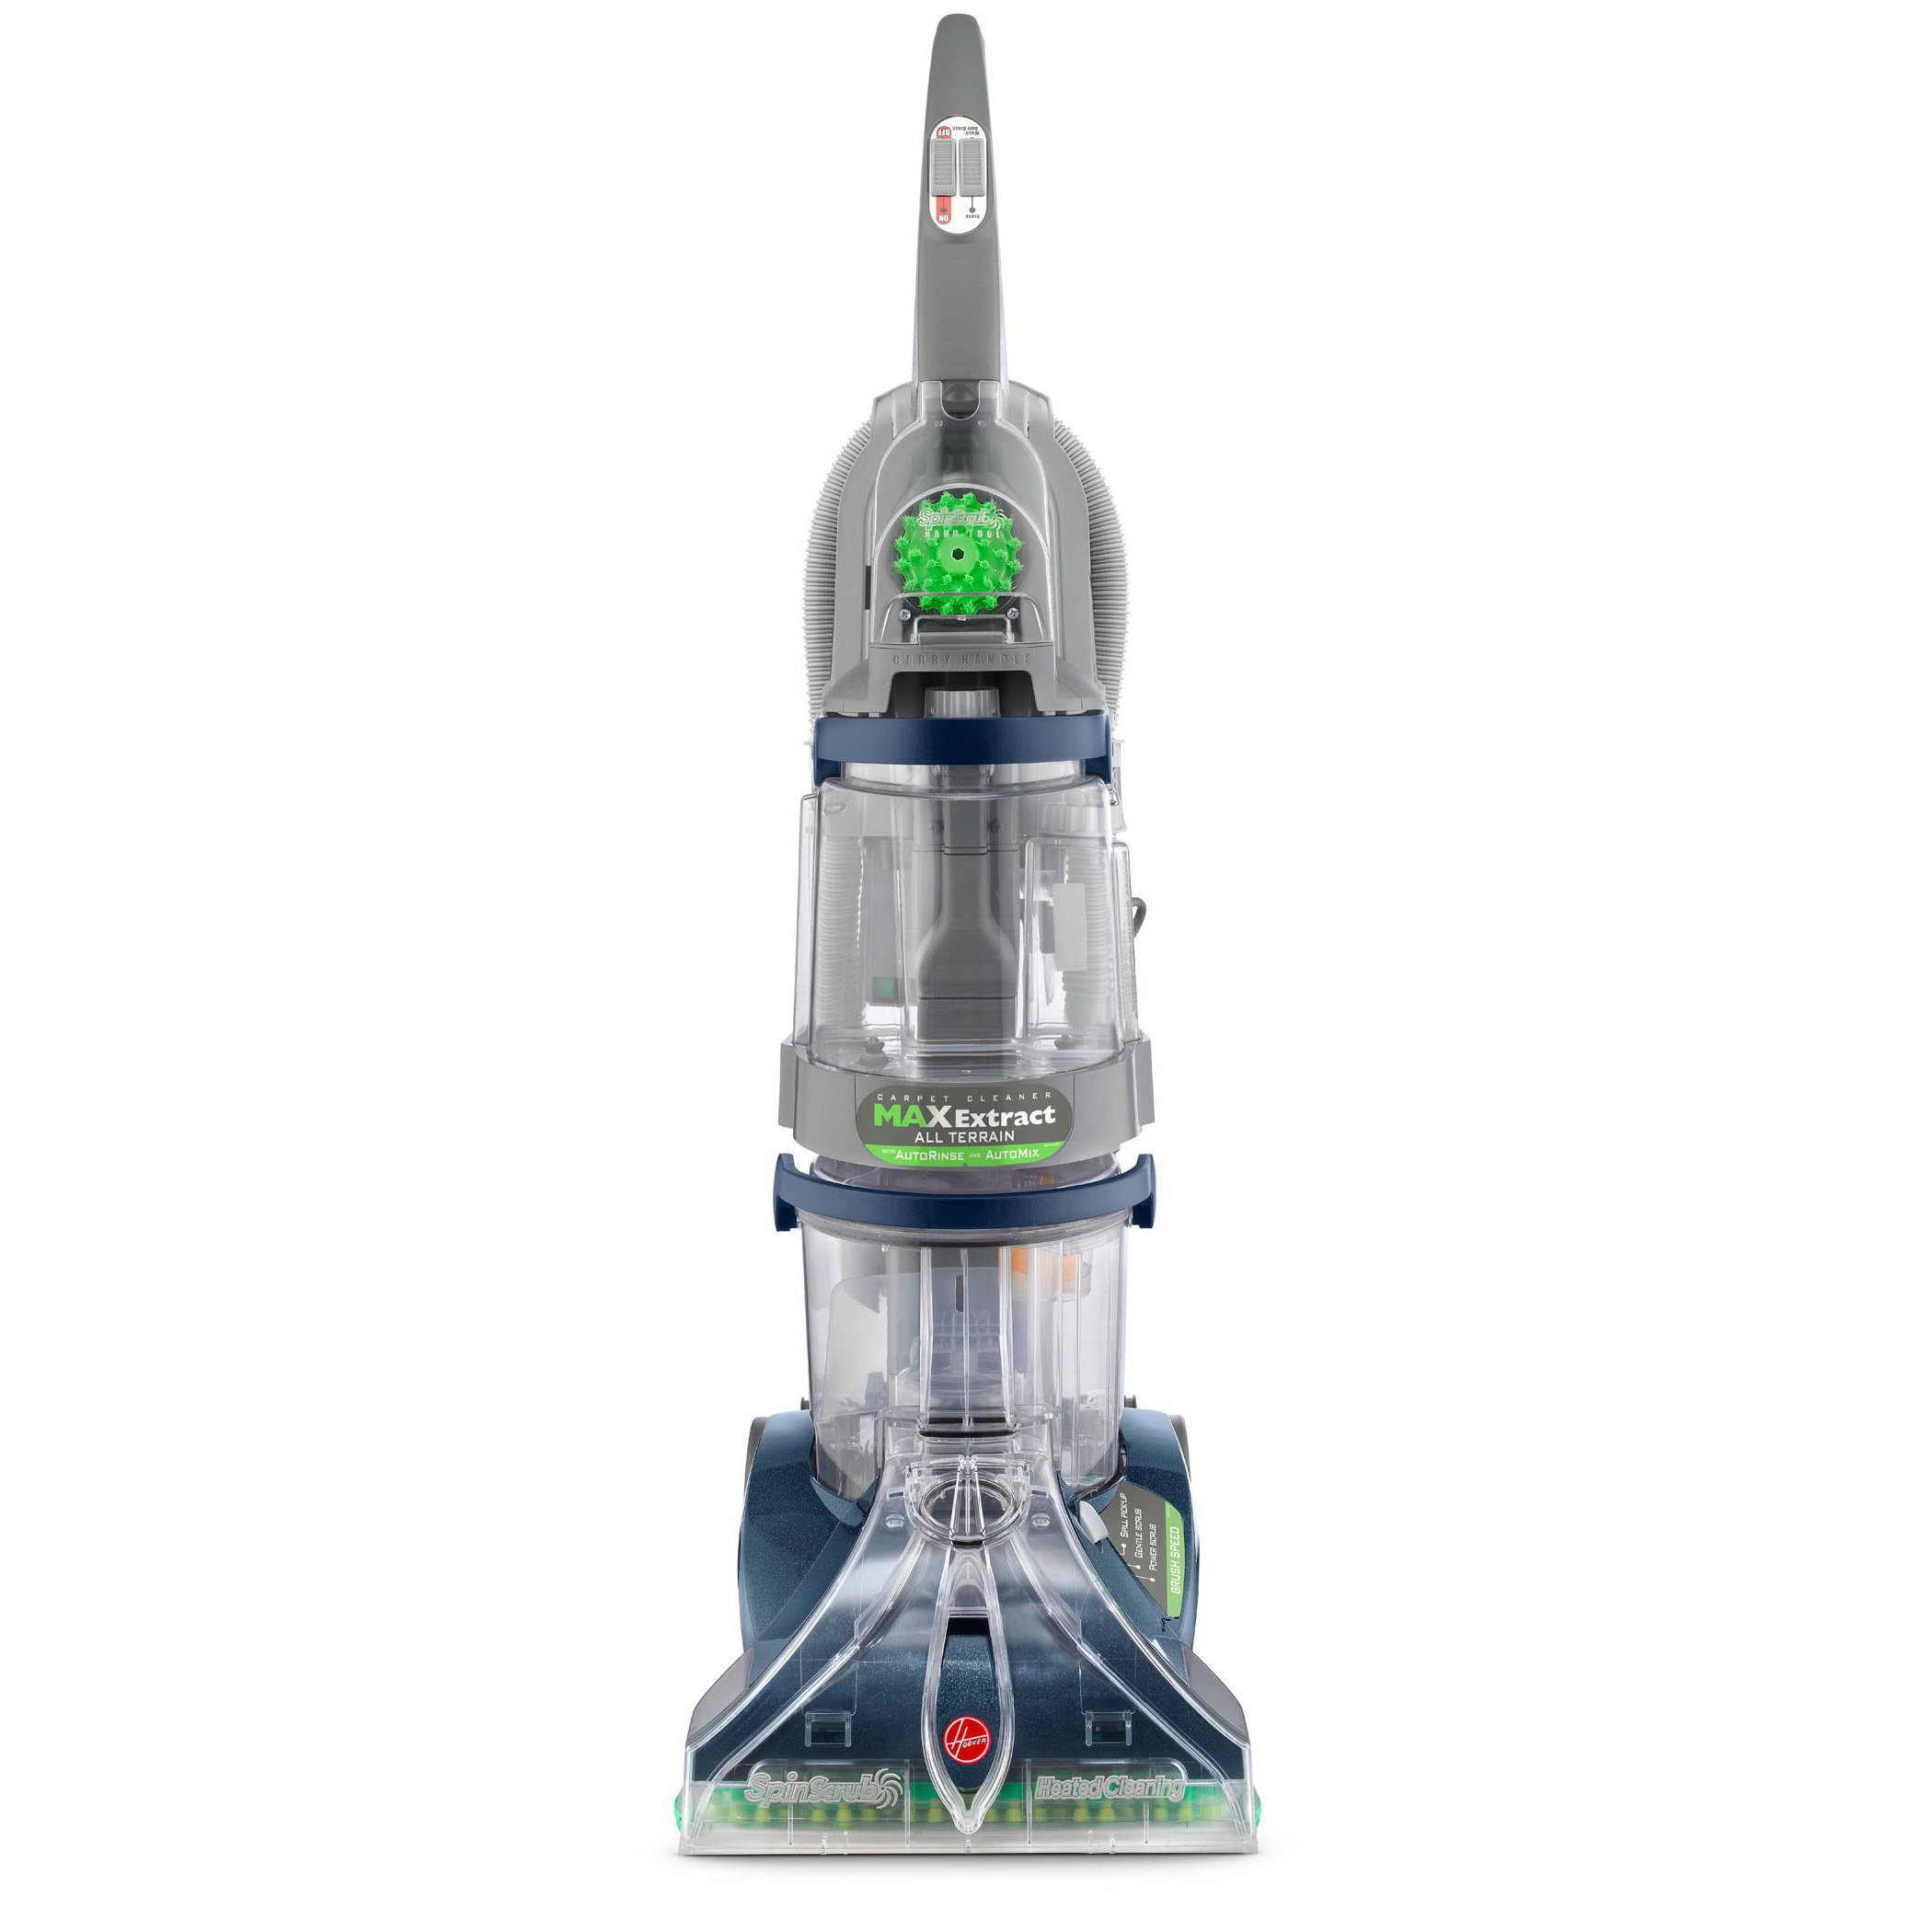 best hardwood floor cleaners 2016 of shop hoover f7452 900 steamvac all terrain 6 brush dual v deep throughout shop hoover f7452 900 steamvac all terrain 6 brush dual v deep cleaner free shipping today overstock com 3055261